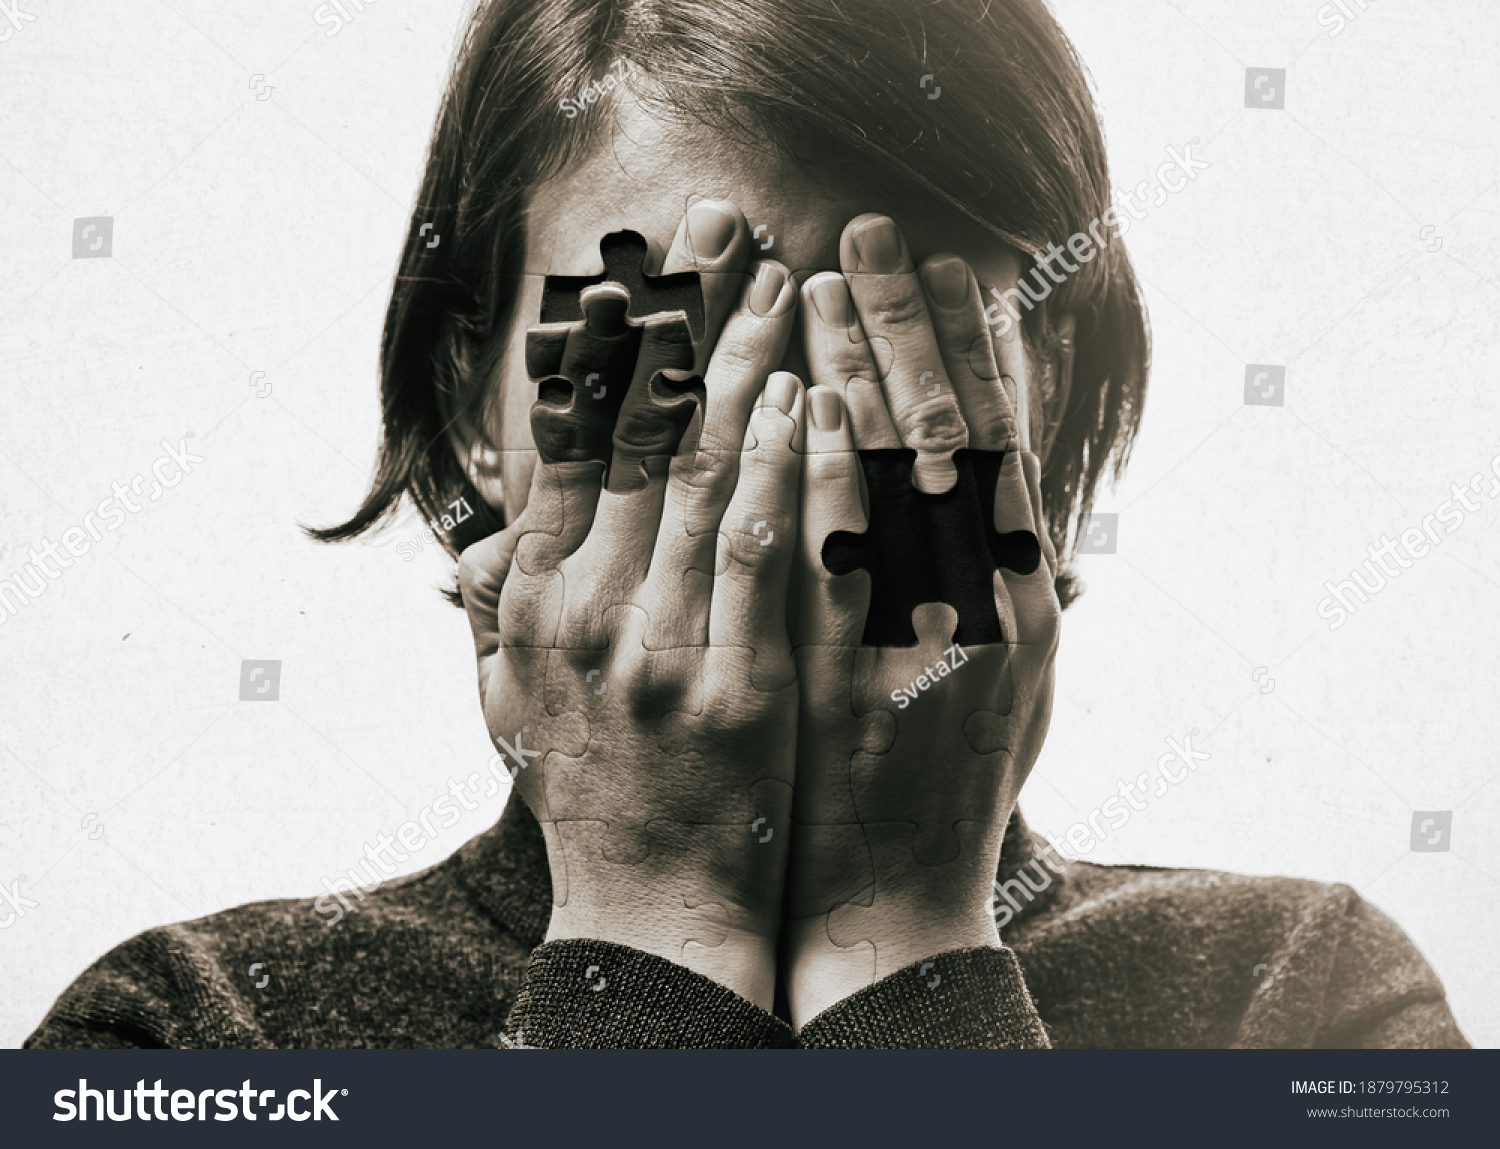 Self-destruction сoncept. Woman covers her face her hands on background with falling pieces of puzzle. Black and white image. #1879795312